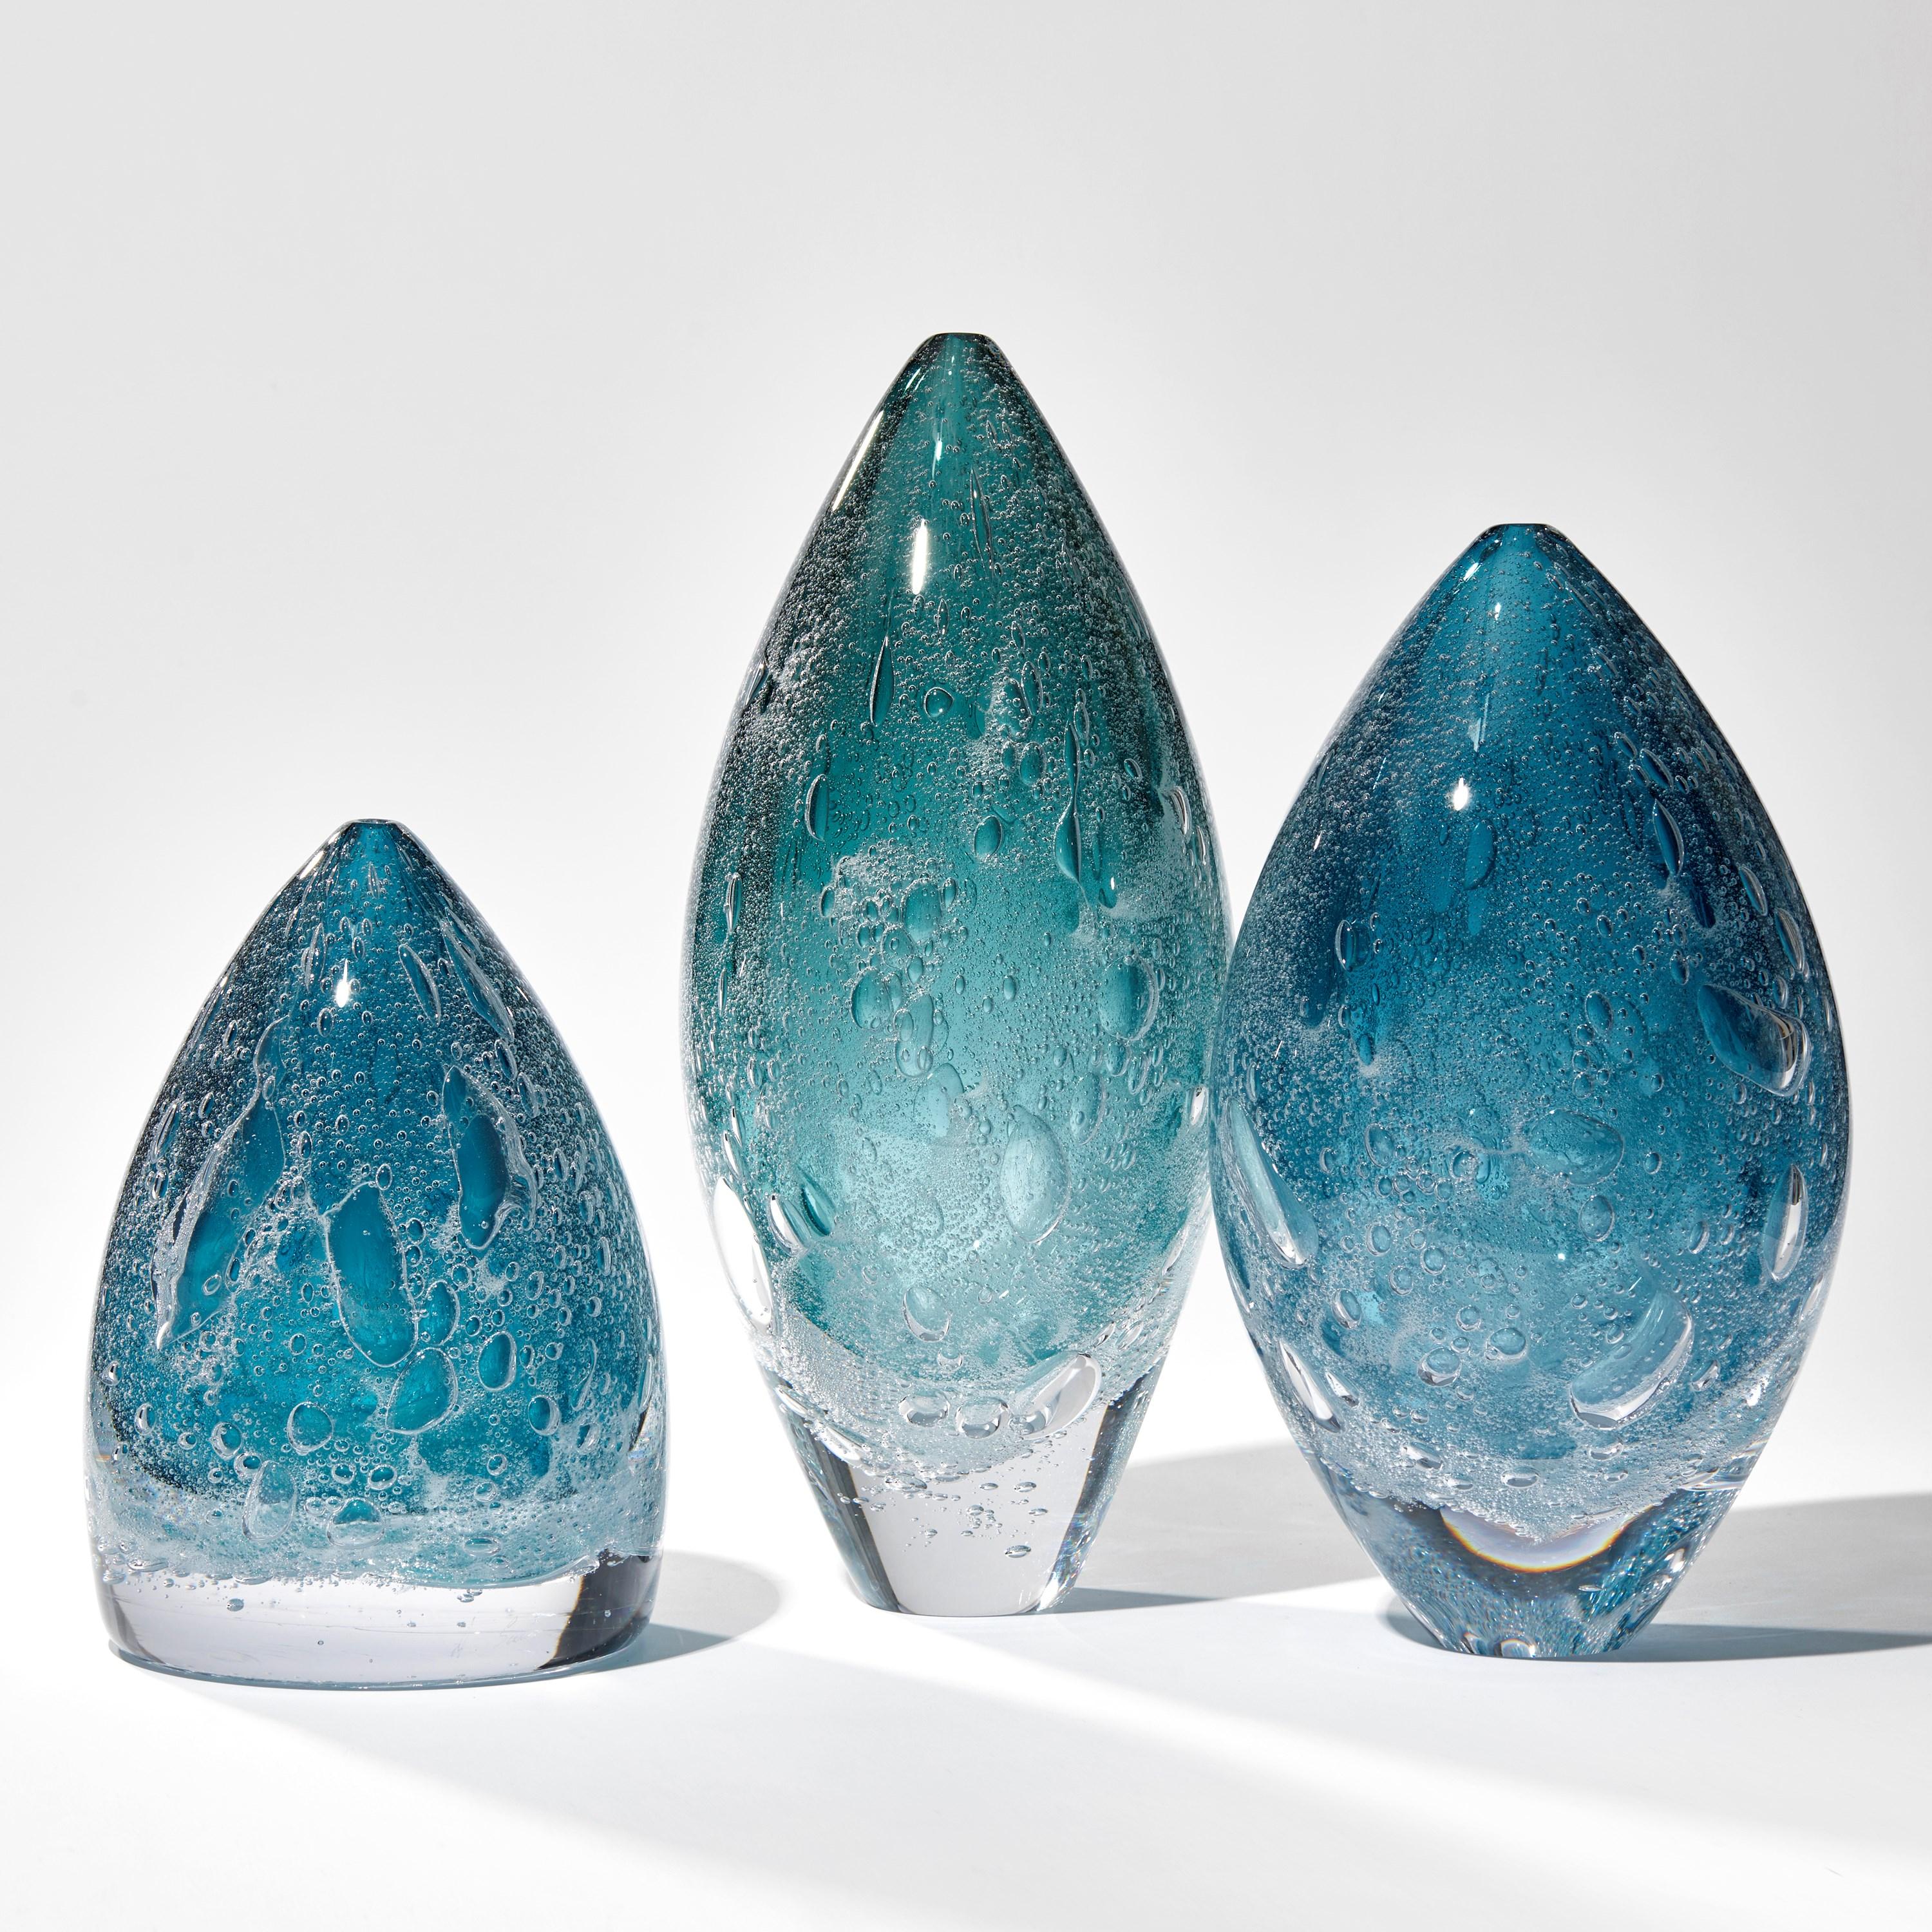 Organic Modern Turbulence in Aqua, A Deep Turquoise Glass Sculpture / Vessel by Anthony Scala